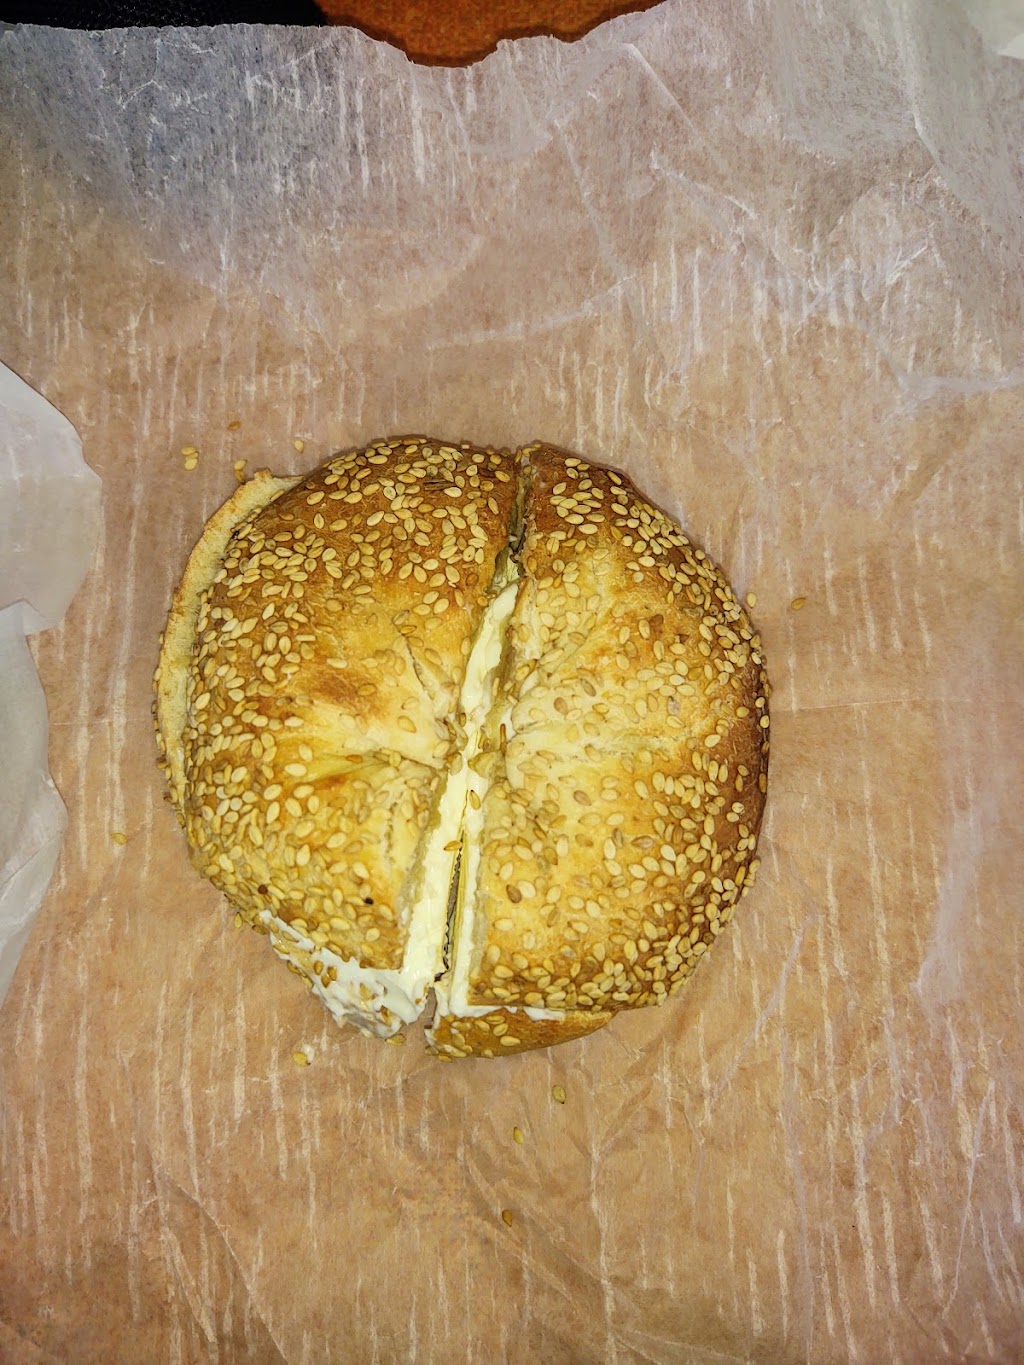 All Star Bagel | 1900 NJ-37 West, Manchester Township, NJ 08759 | Phone: (732) 323-1735